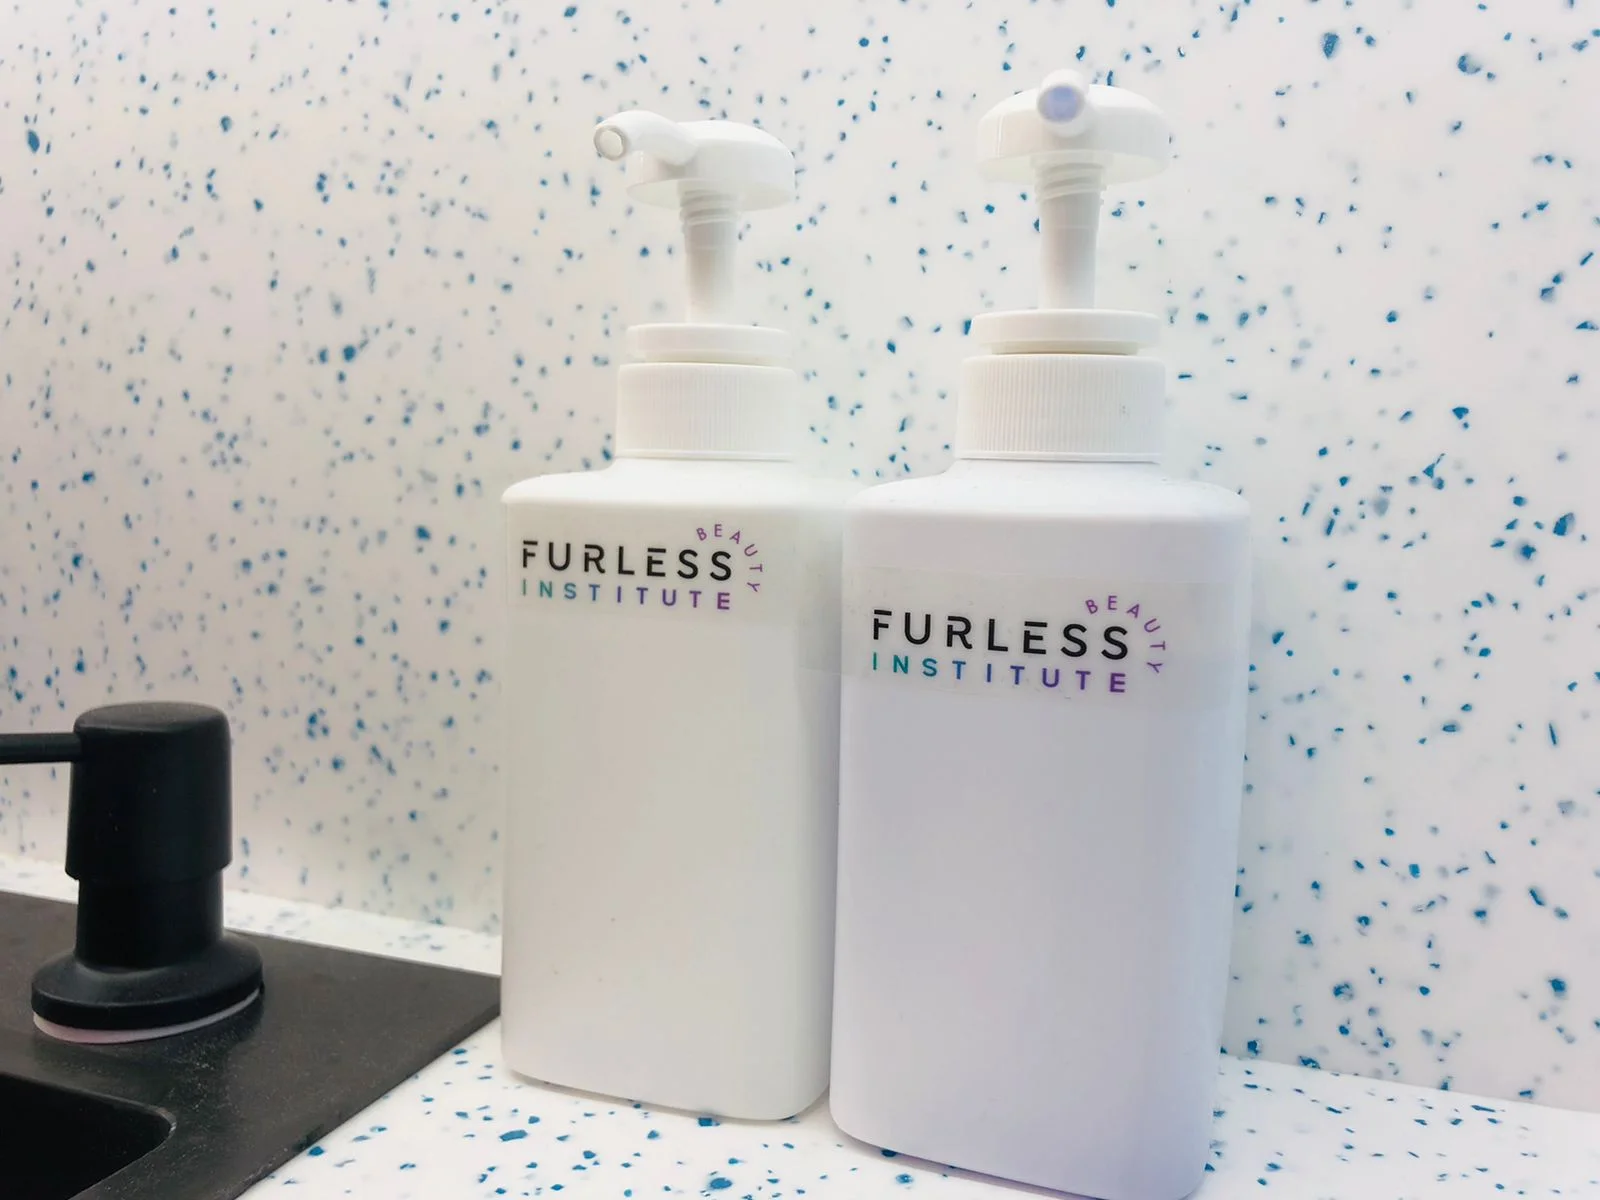 Furless-Beauty-Institute cleaning